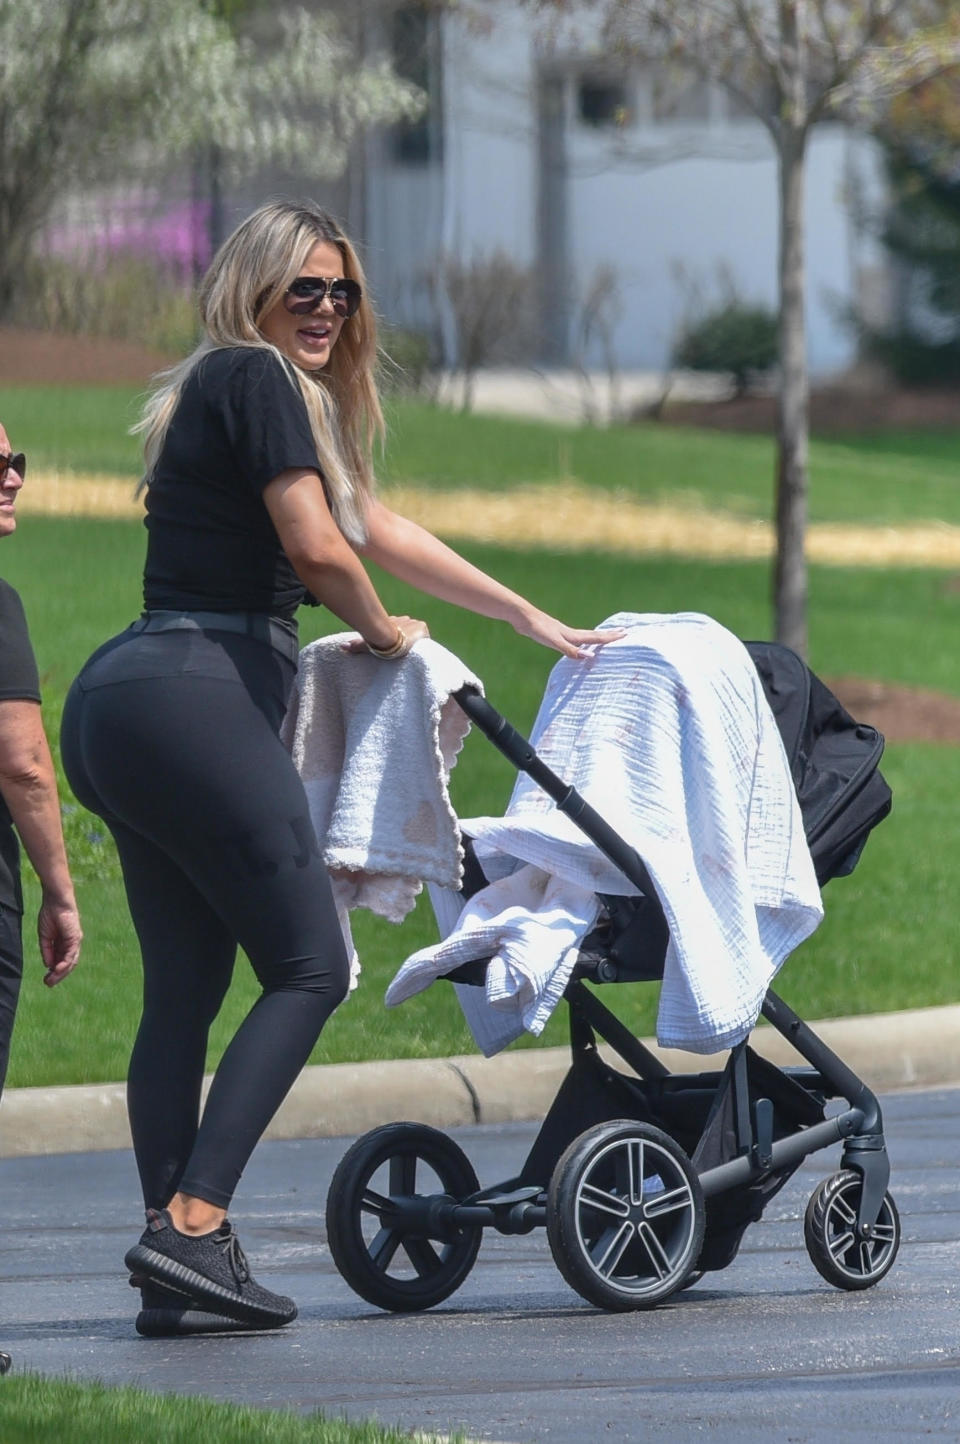 Khloe Kardashian has been spotted out with daughter True for the first time in Cleveland, Ohio. The 33-year-old flaunted her incredible post-baby body. Source: Backgrid